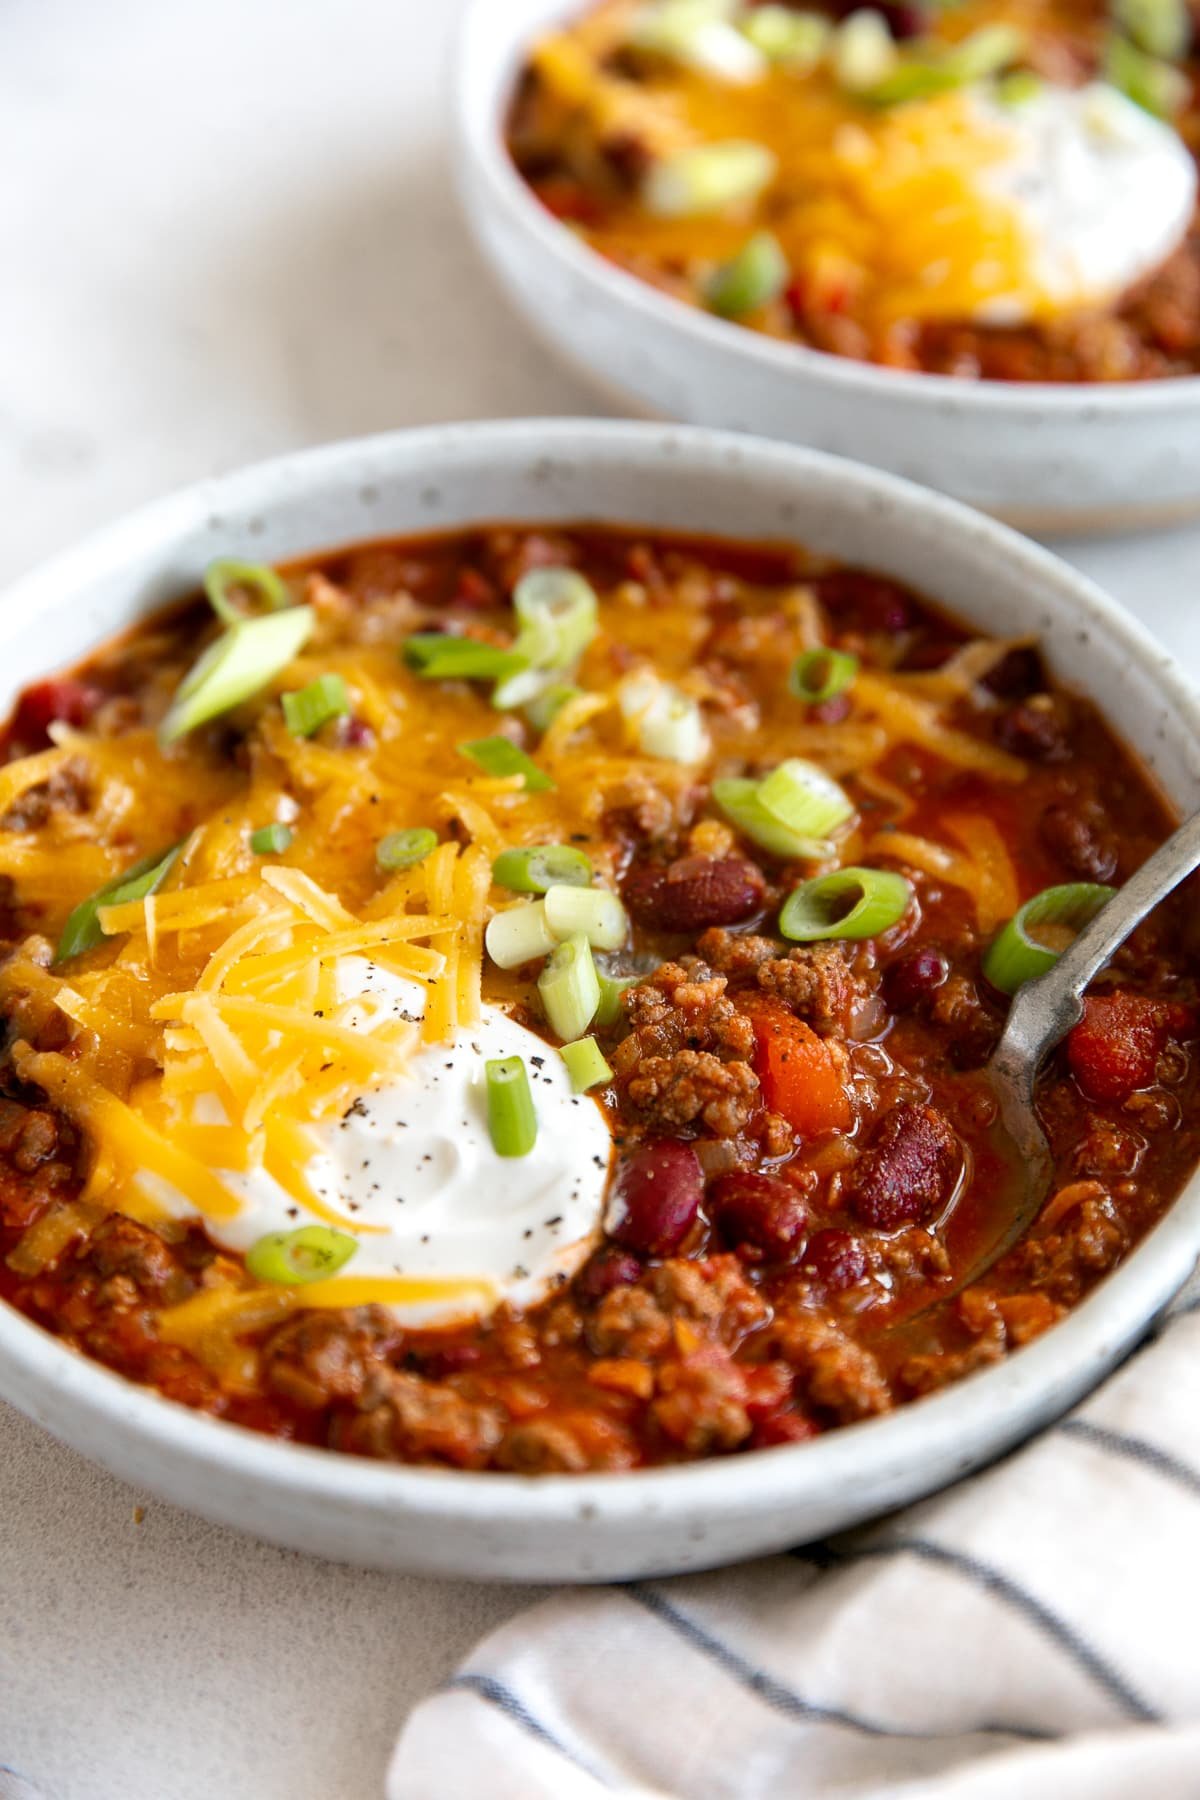 The Chili Recipe - The Forked